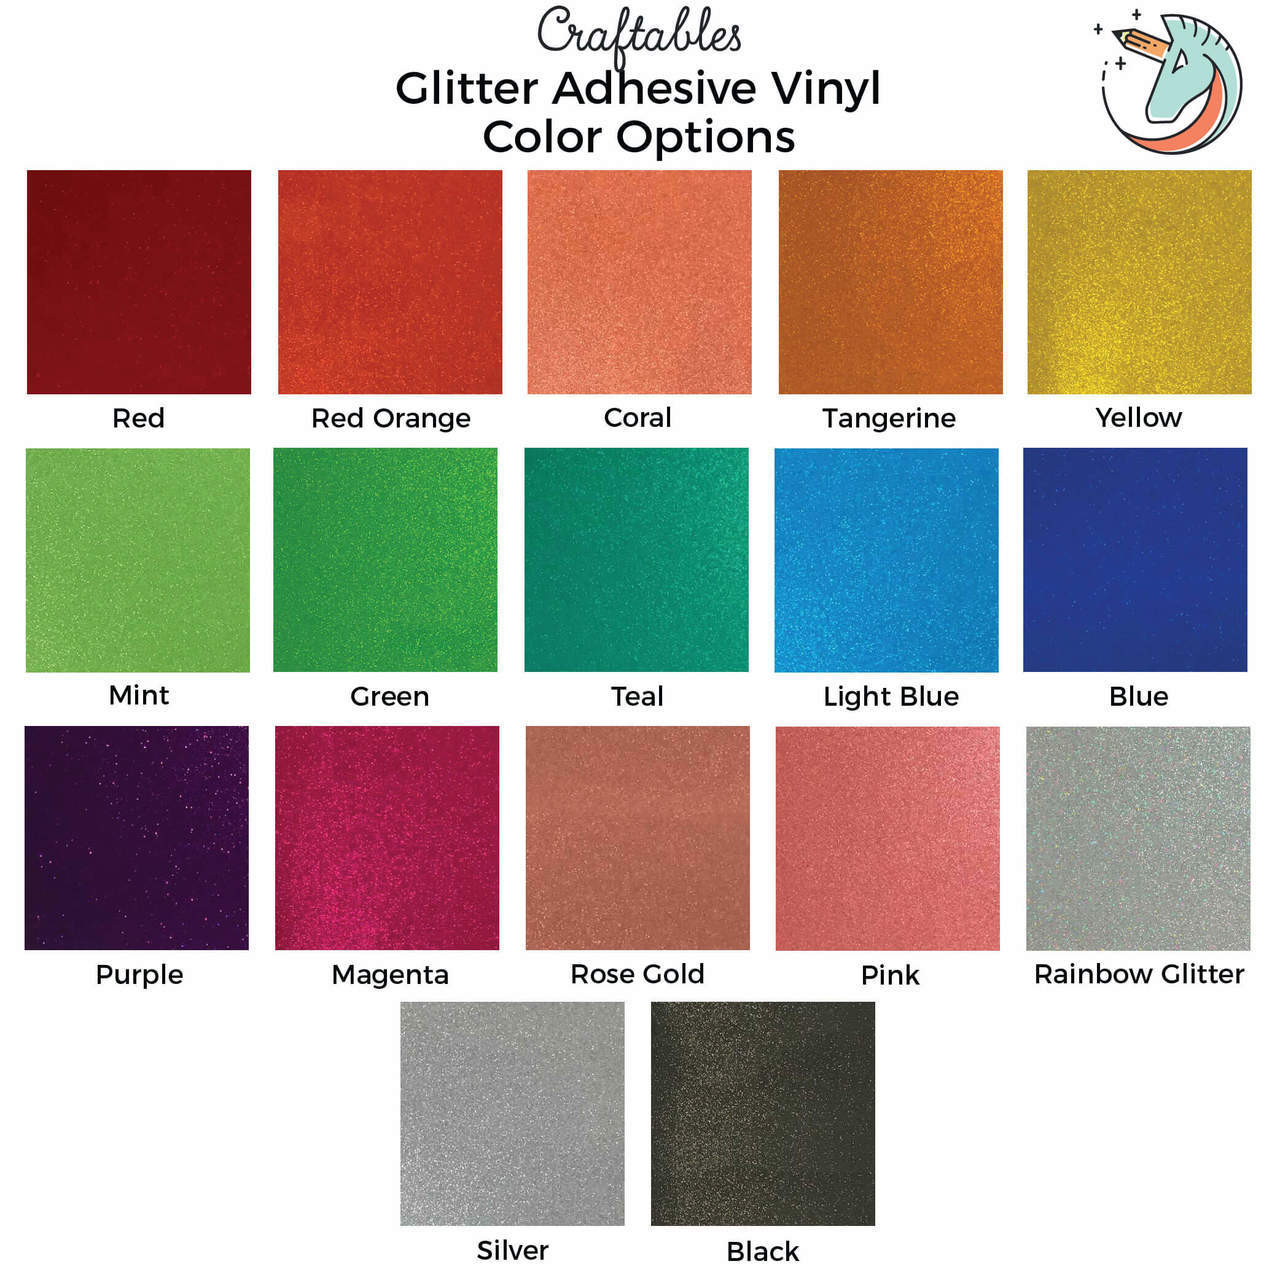 Silver Glitter Adhesive Vinyl Sheets By Craftables